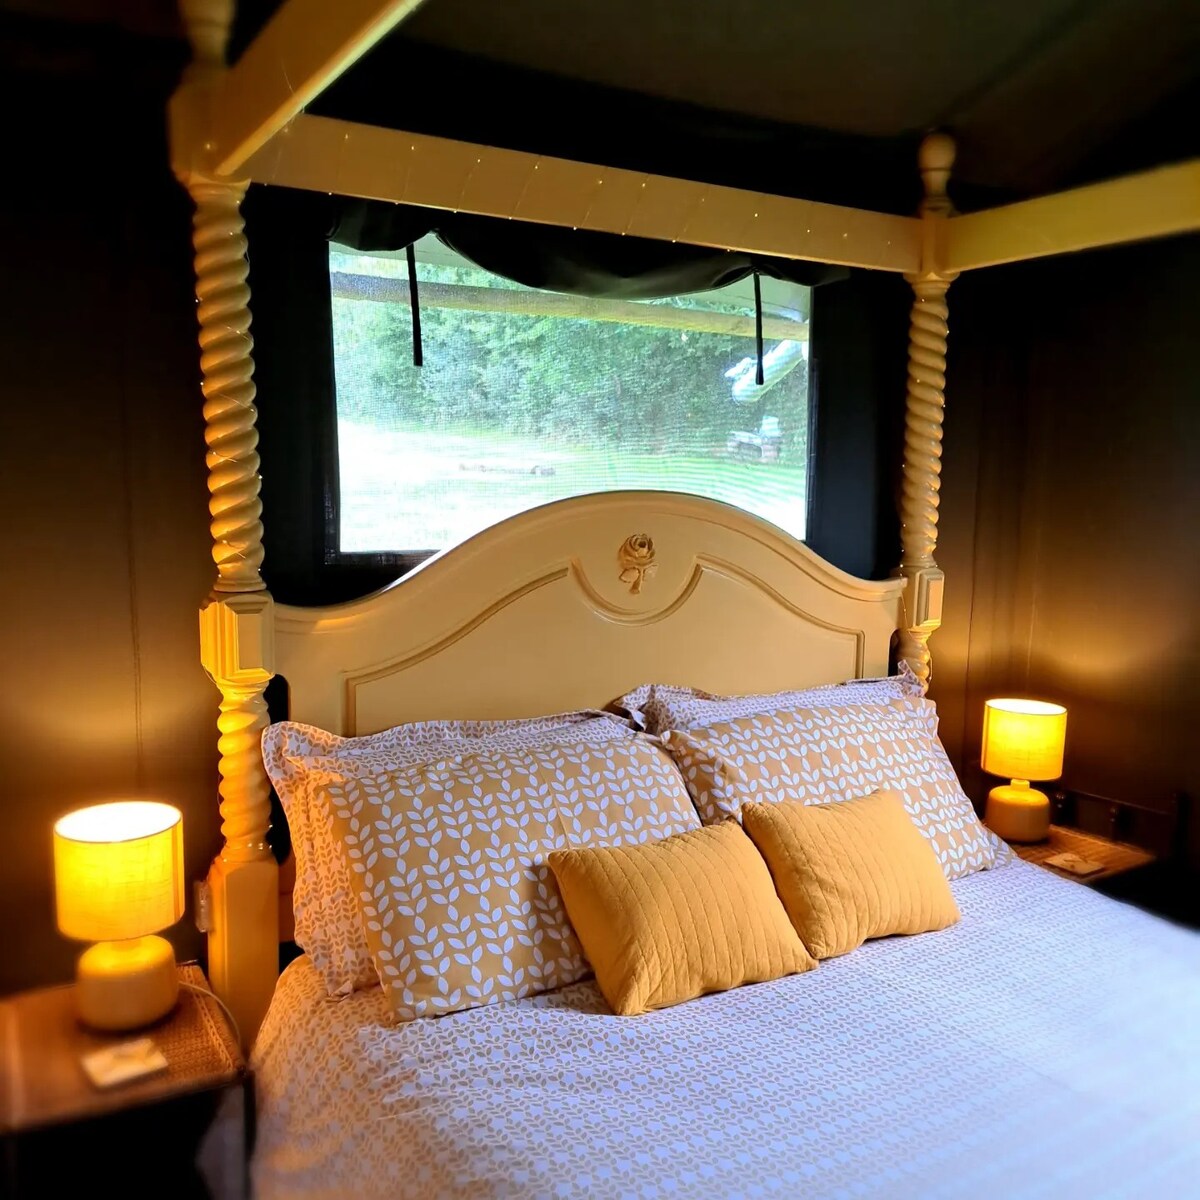 Brackenhill - Luxury Glamping with Hot Tub